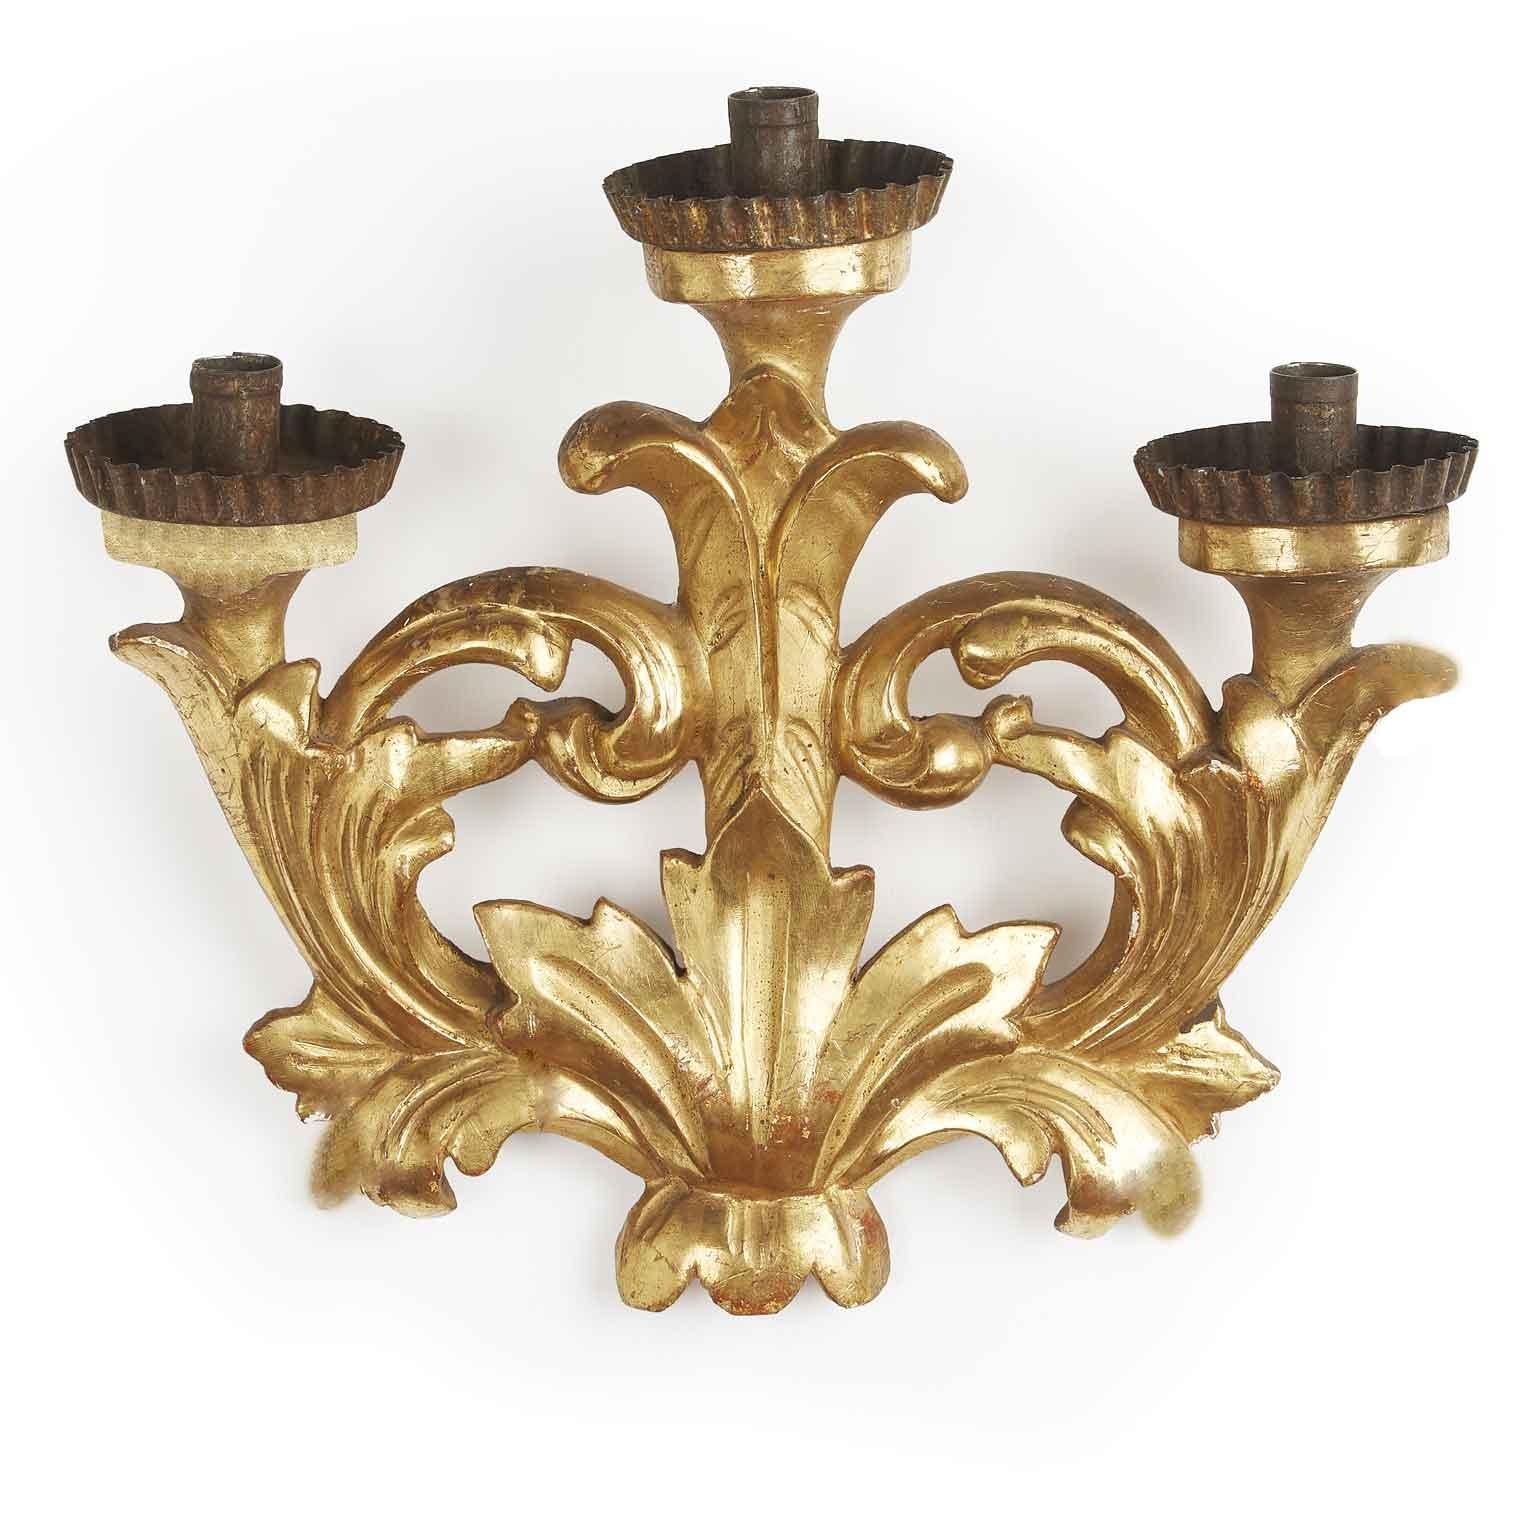 Pair of Italian Baroque Giltwood Wall Candelabra 19th Century Carved Sconces In Good Condition For Sale In Milan, IT